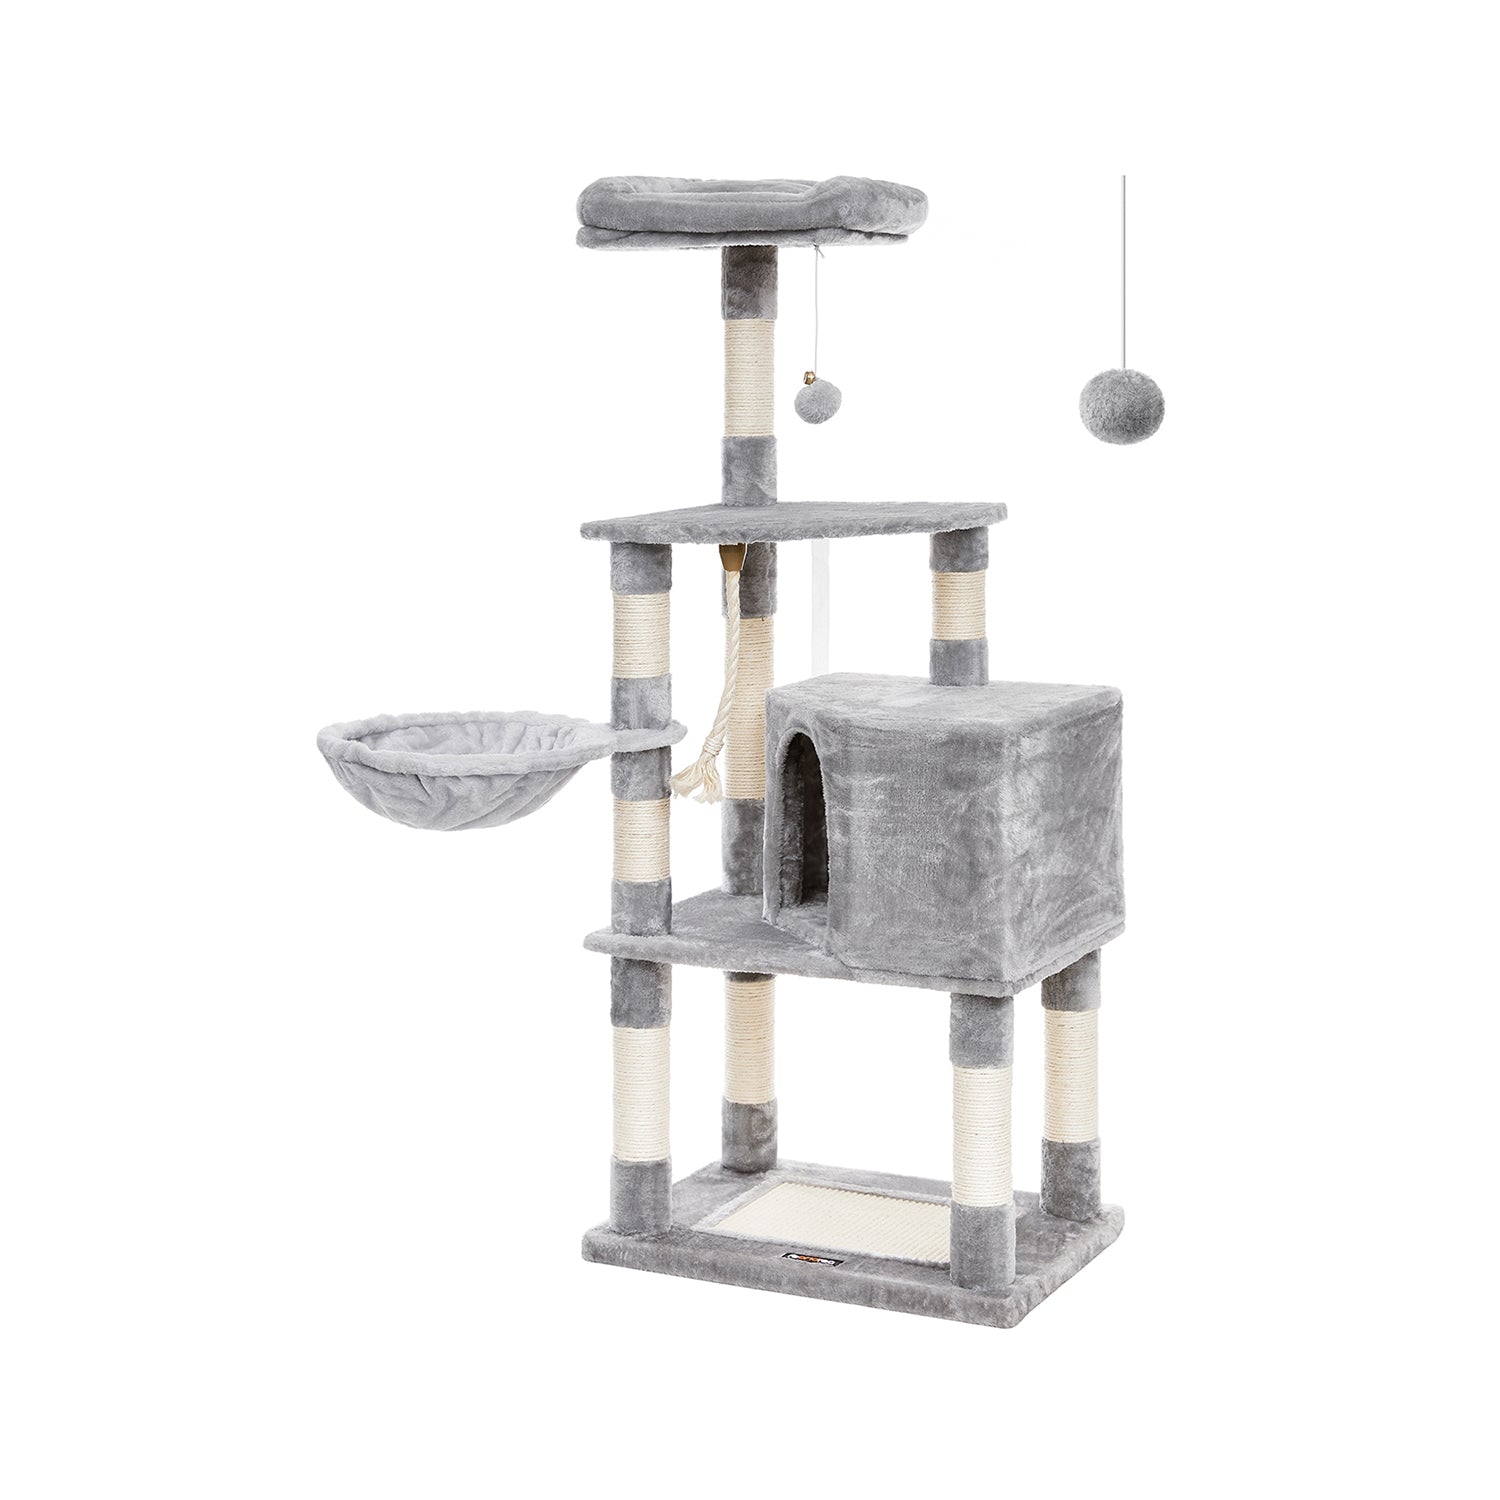 Cat Tree with Scratching Posts, Cat Tower, Kitten Furniture Activity Centre, Plush and Light Grey, FEANDREA, 1